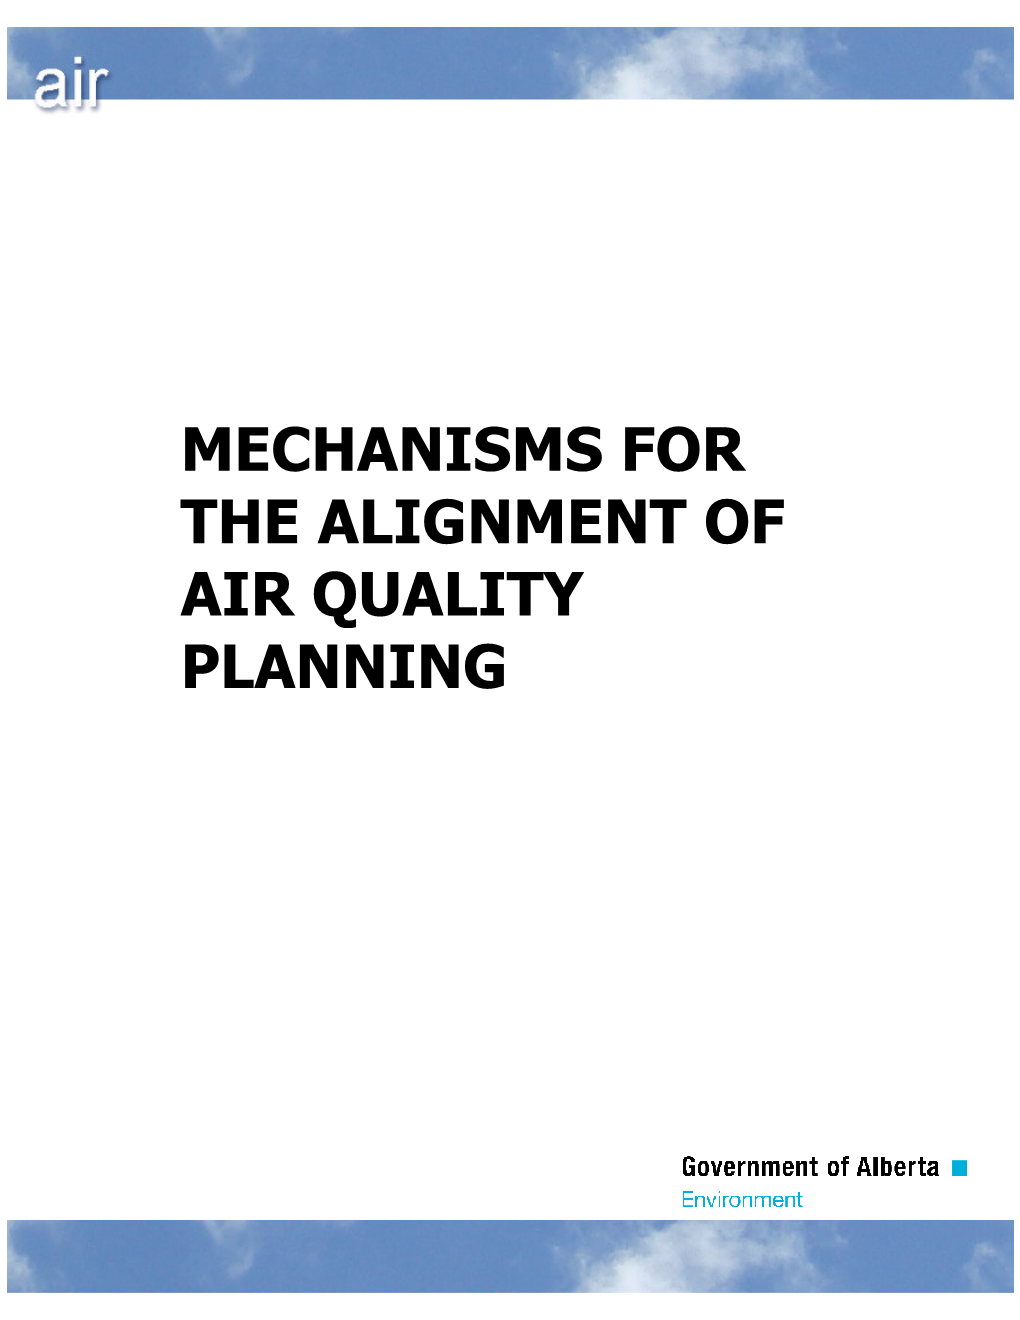 Mechanisms for the Alignment of Air Quality Planning